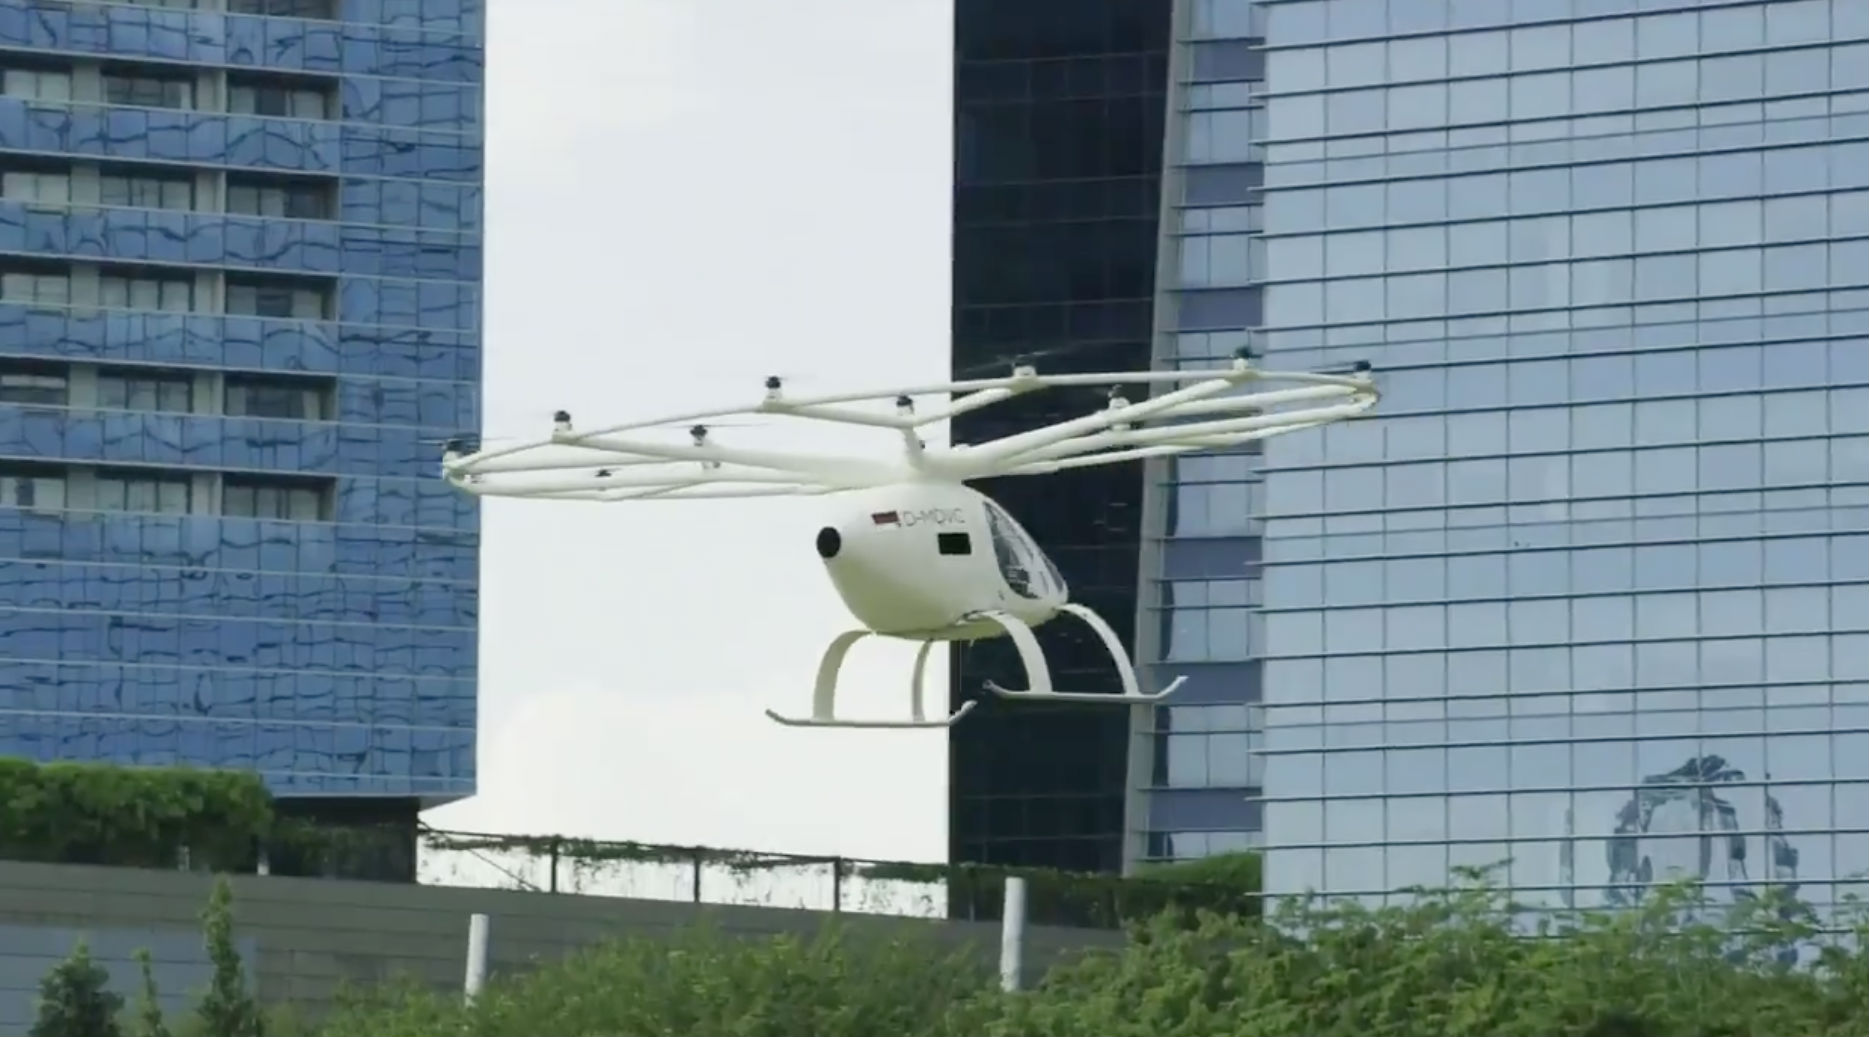 A volocopter in action. Image: Volocopter/Twitter